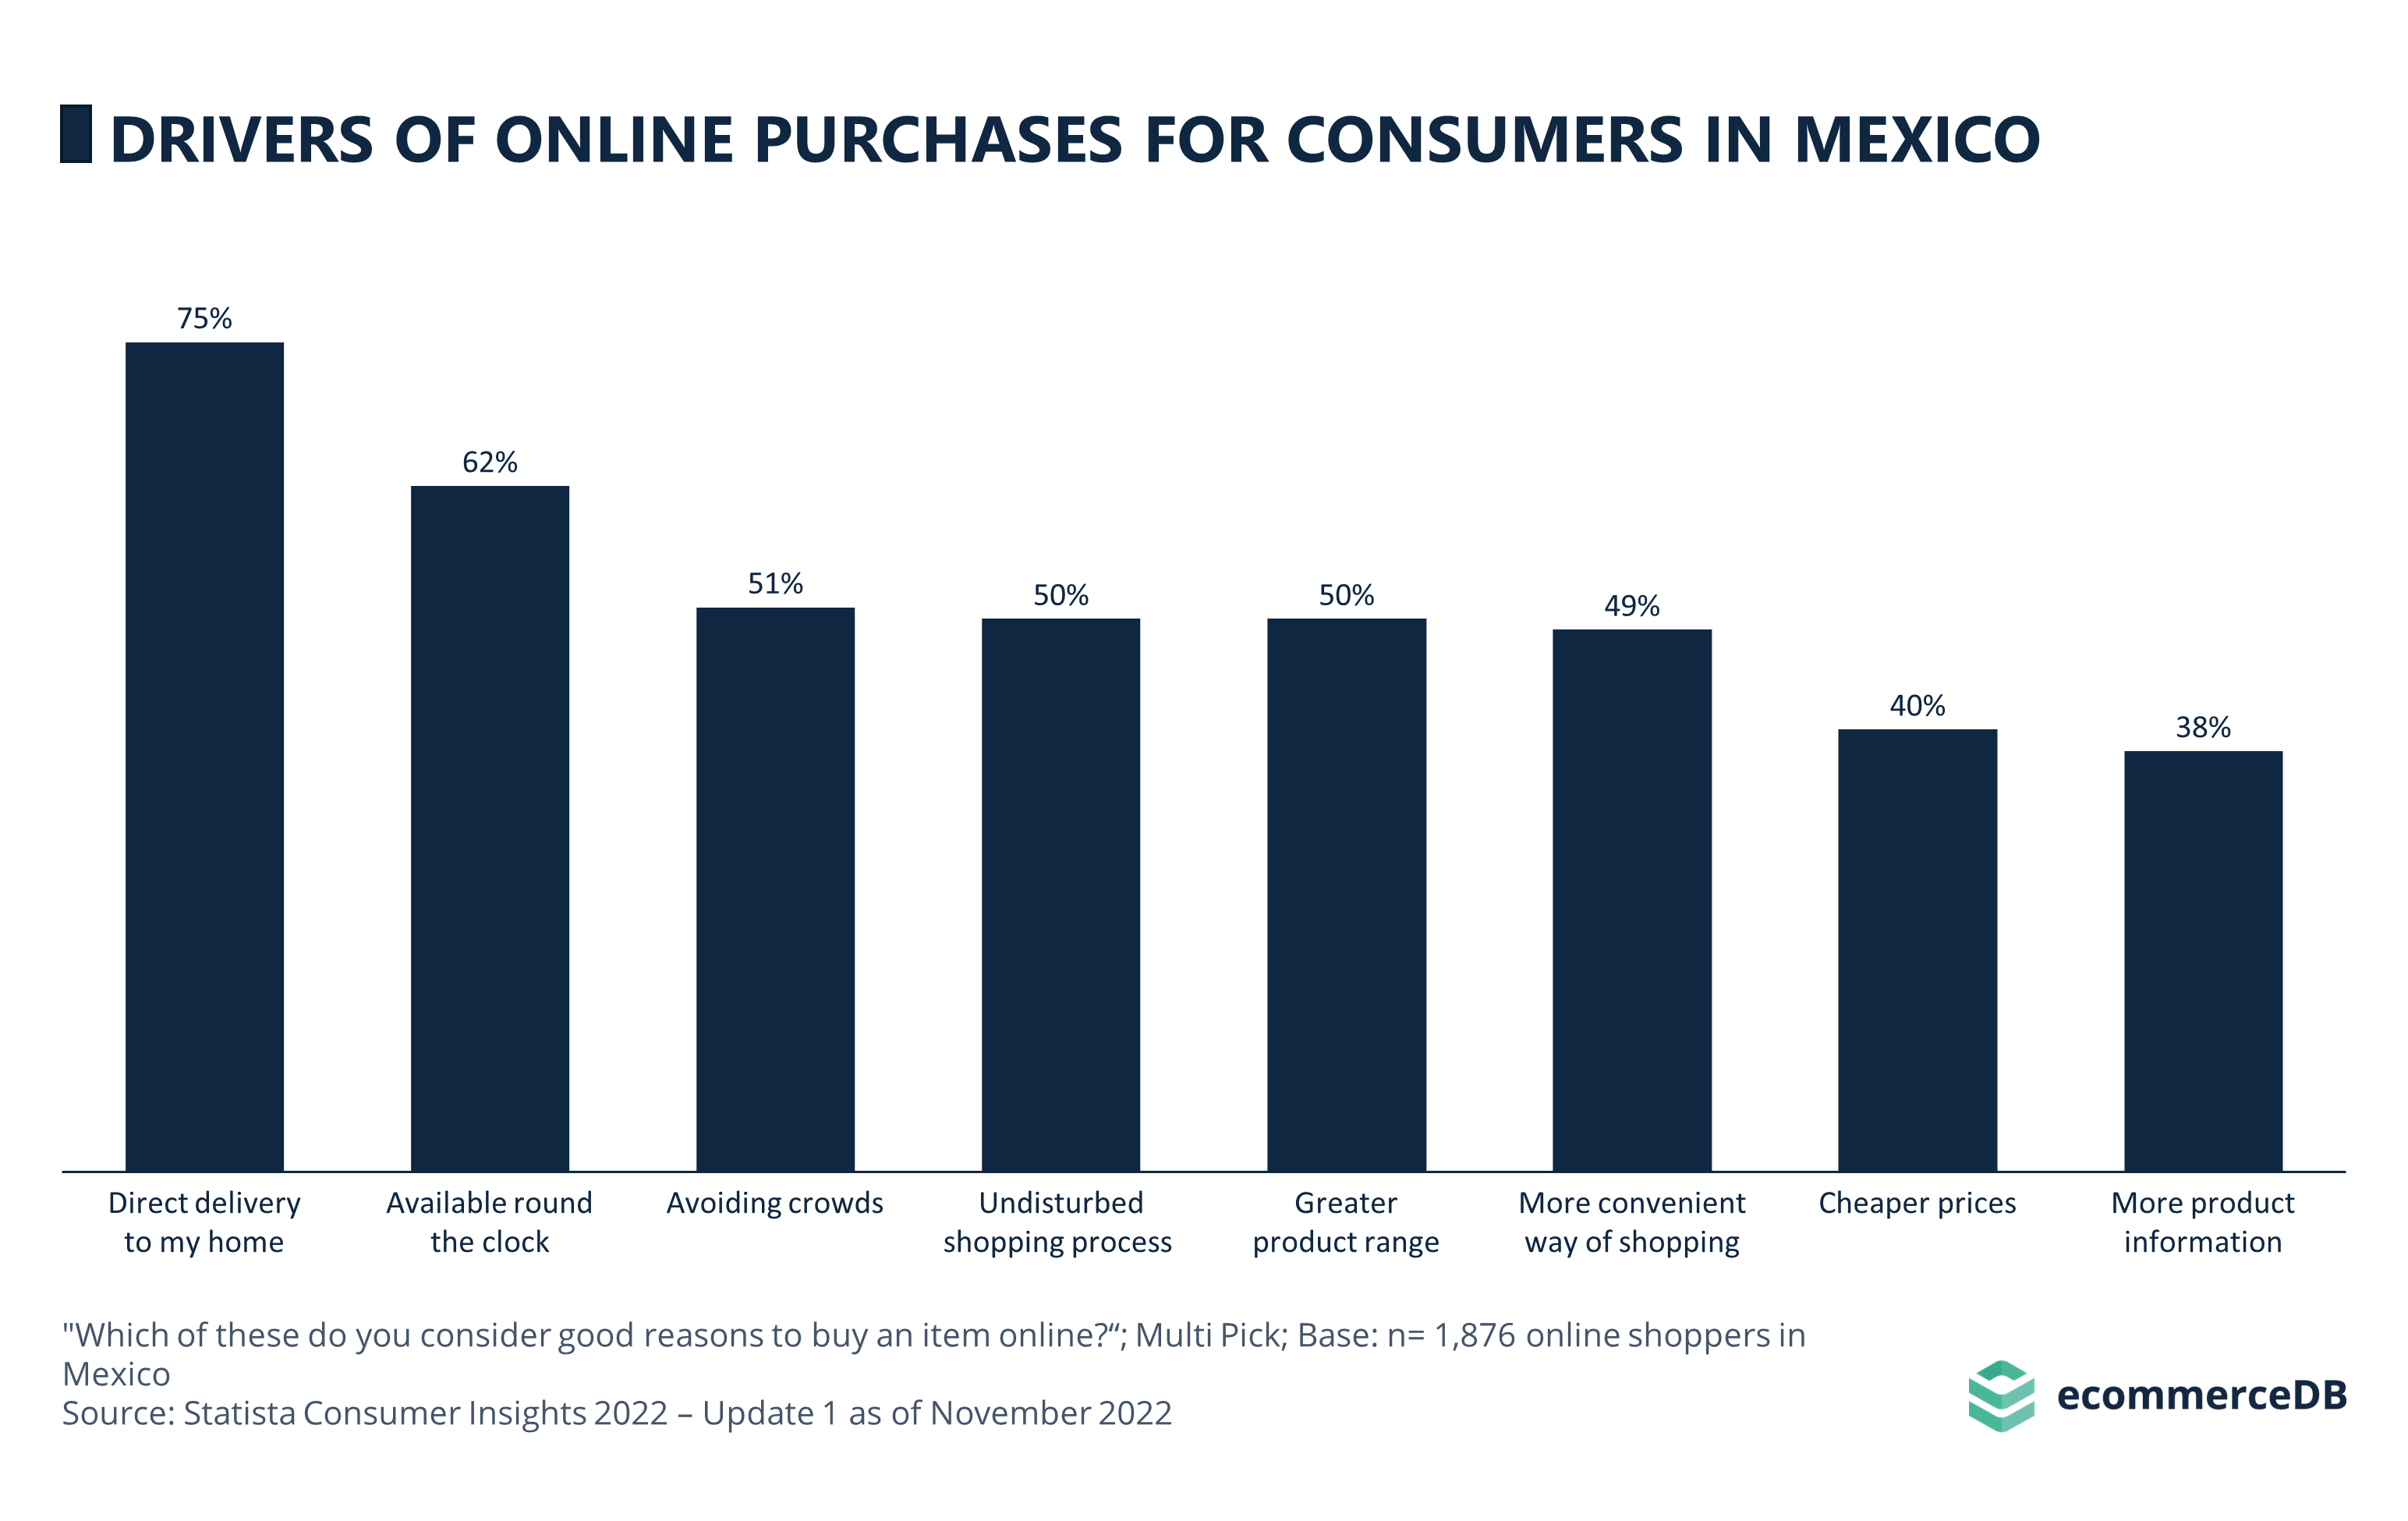 Drivers of Online Purchases for Consumers in Mexico